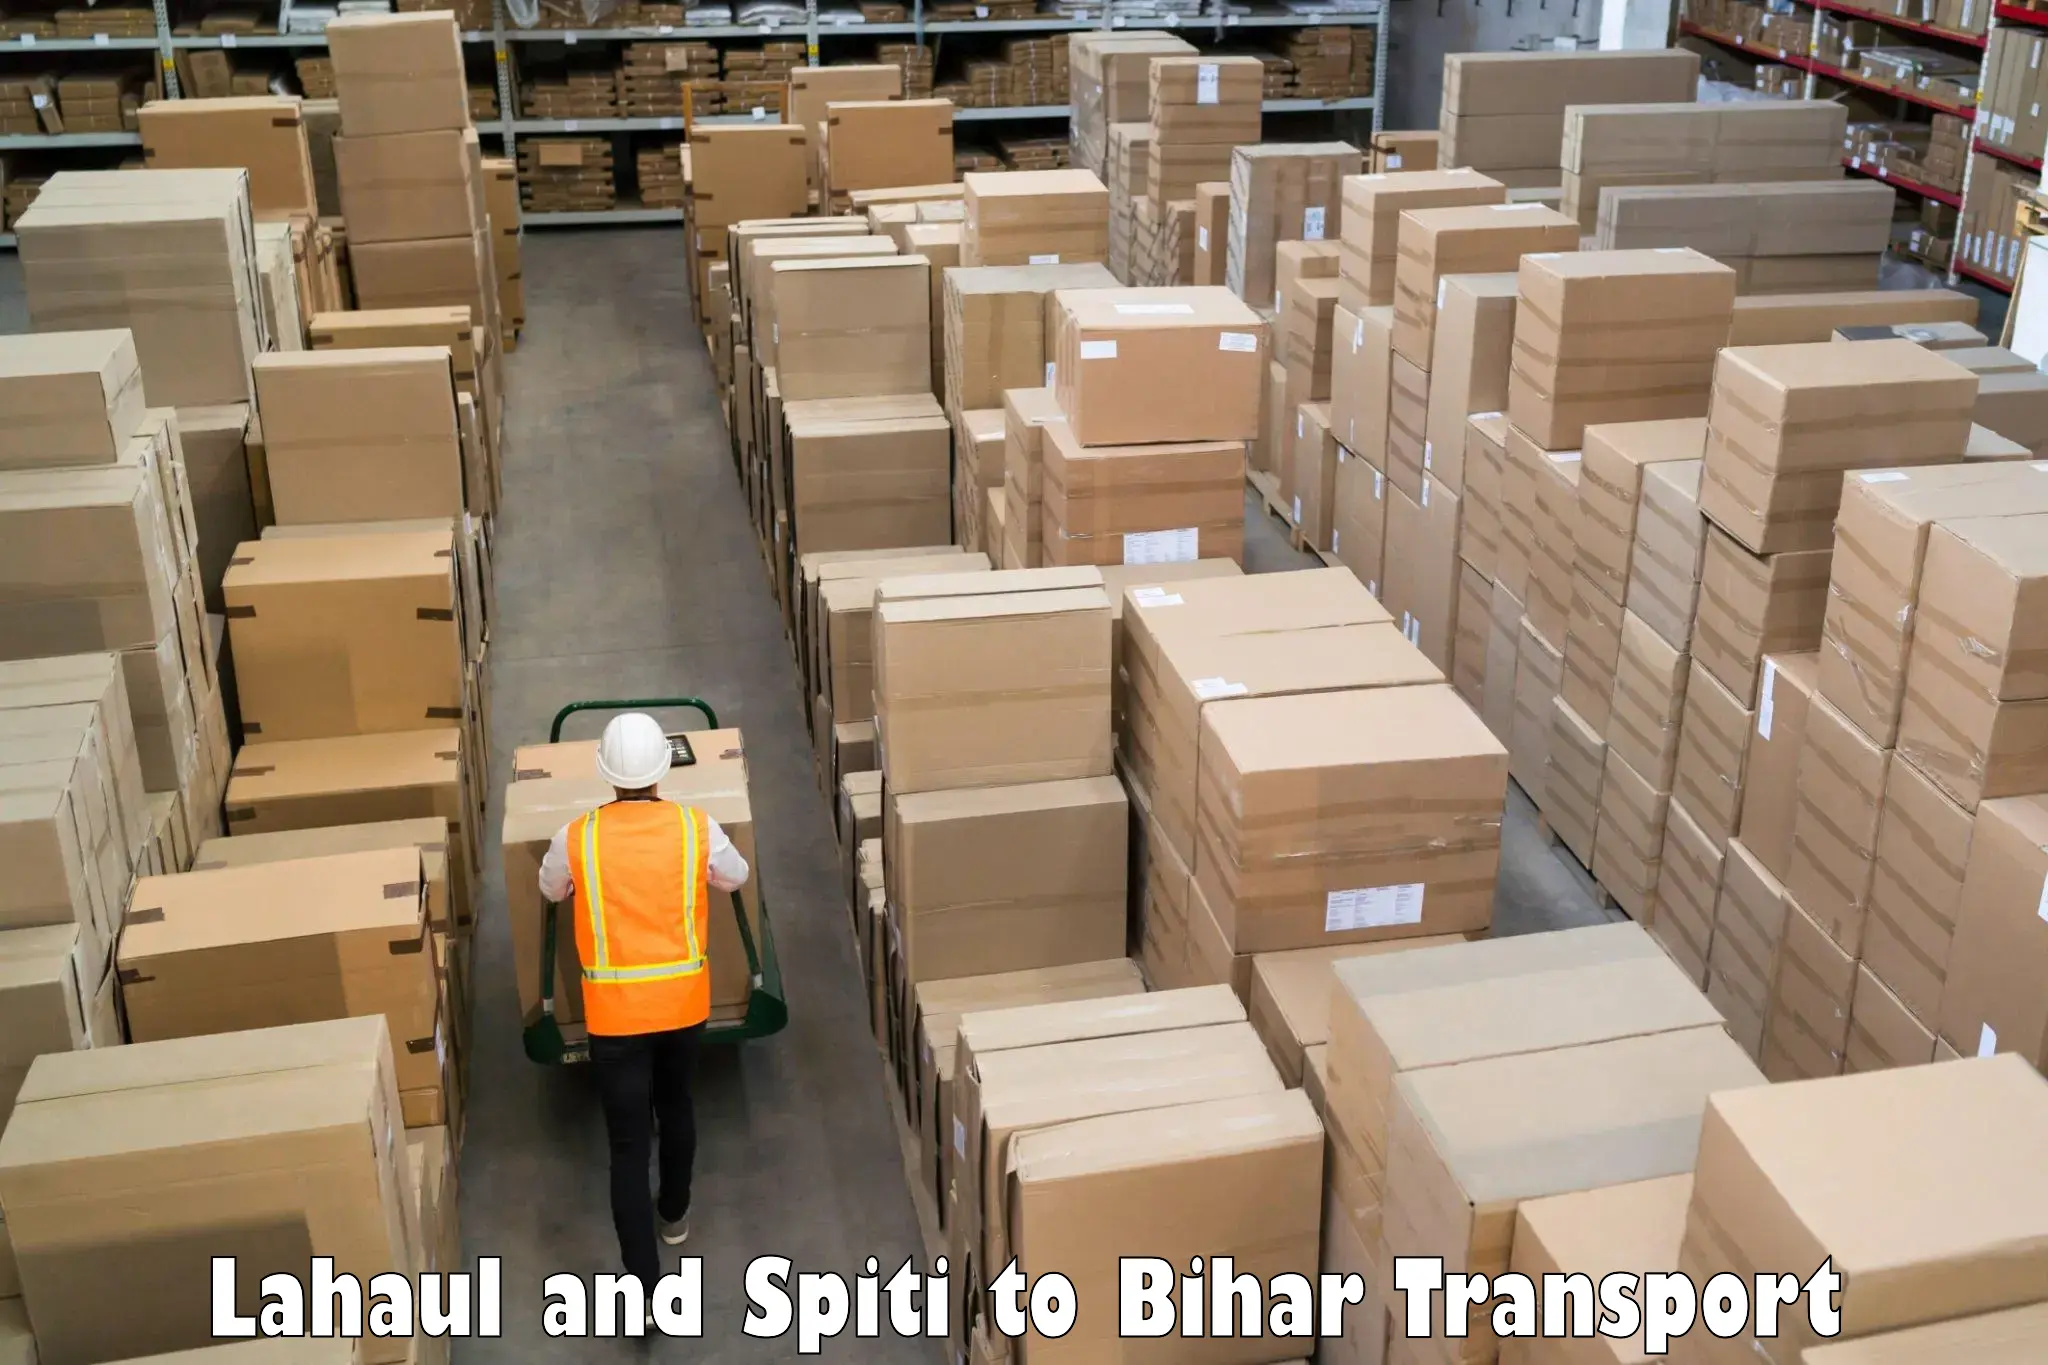 Container transport service Lahaul and Spiti to Sugauli